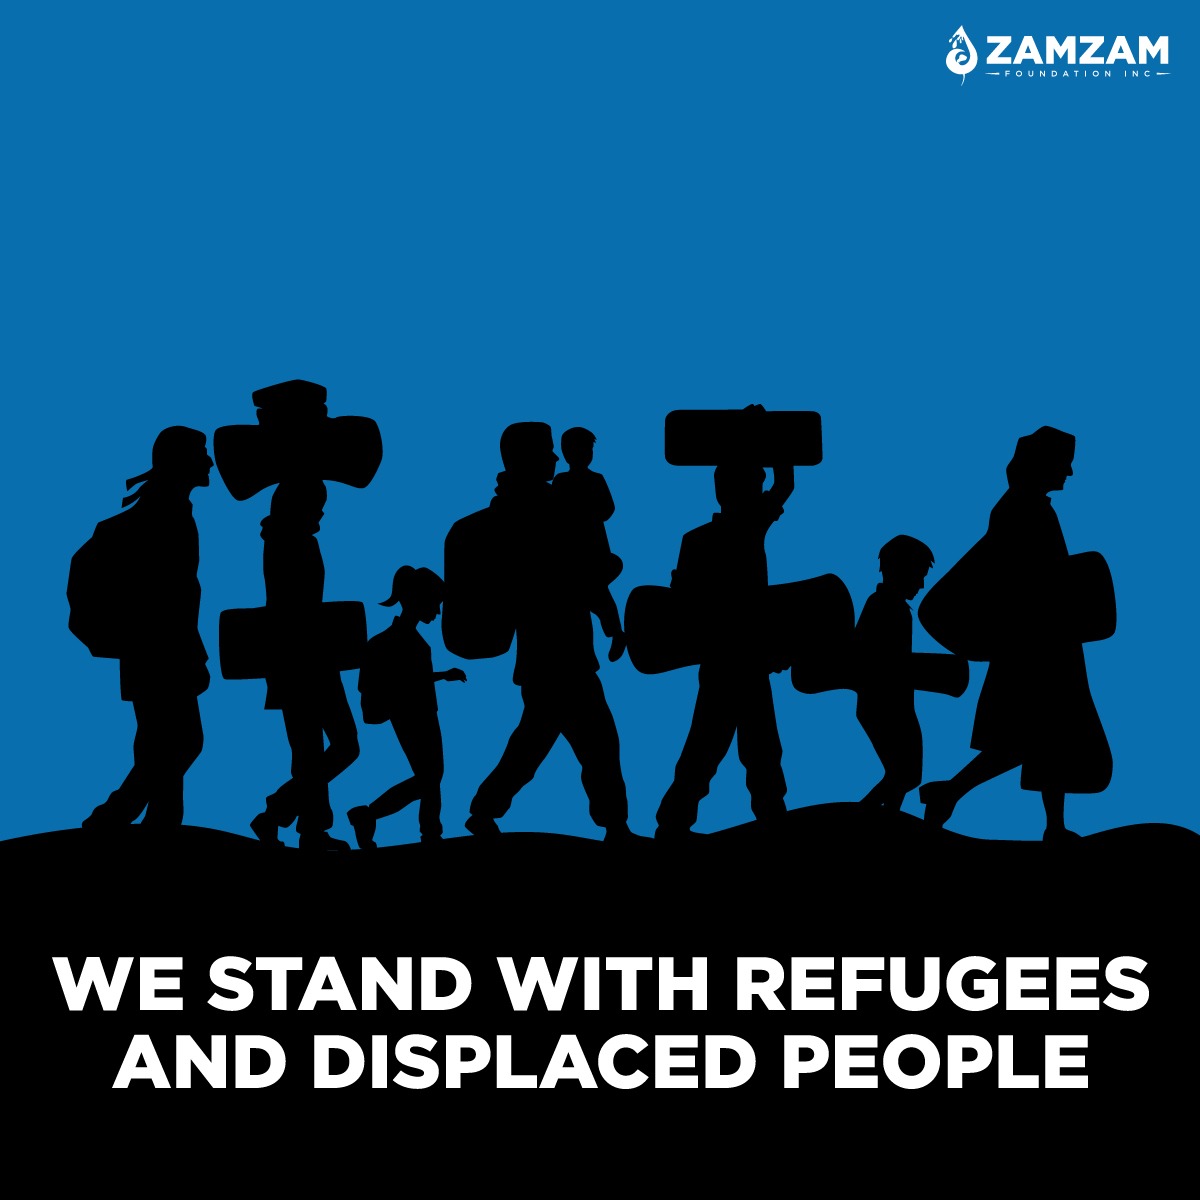 Let's extend compassion, empathy, and support to those seeking safety and a better future.

zamzam180.org/causes/help-ed…

#StandWithRefugees #InternationalRefugeesDay #ForcedToFlee #RaiseAwareness #AdvocateForRights #BetterFuture